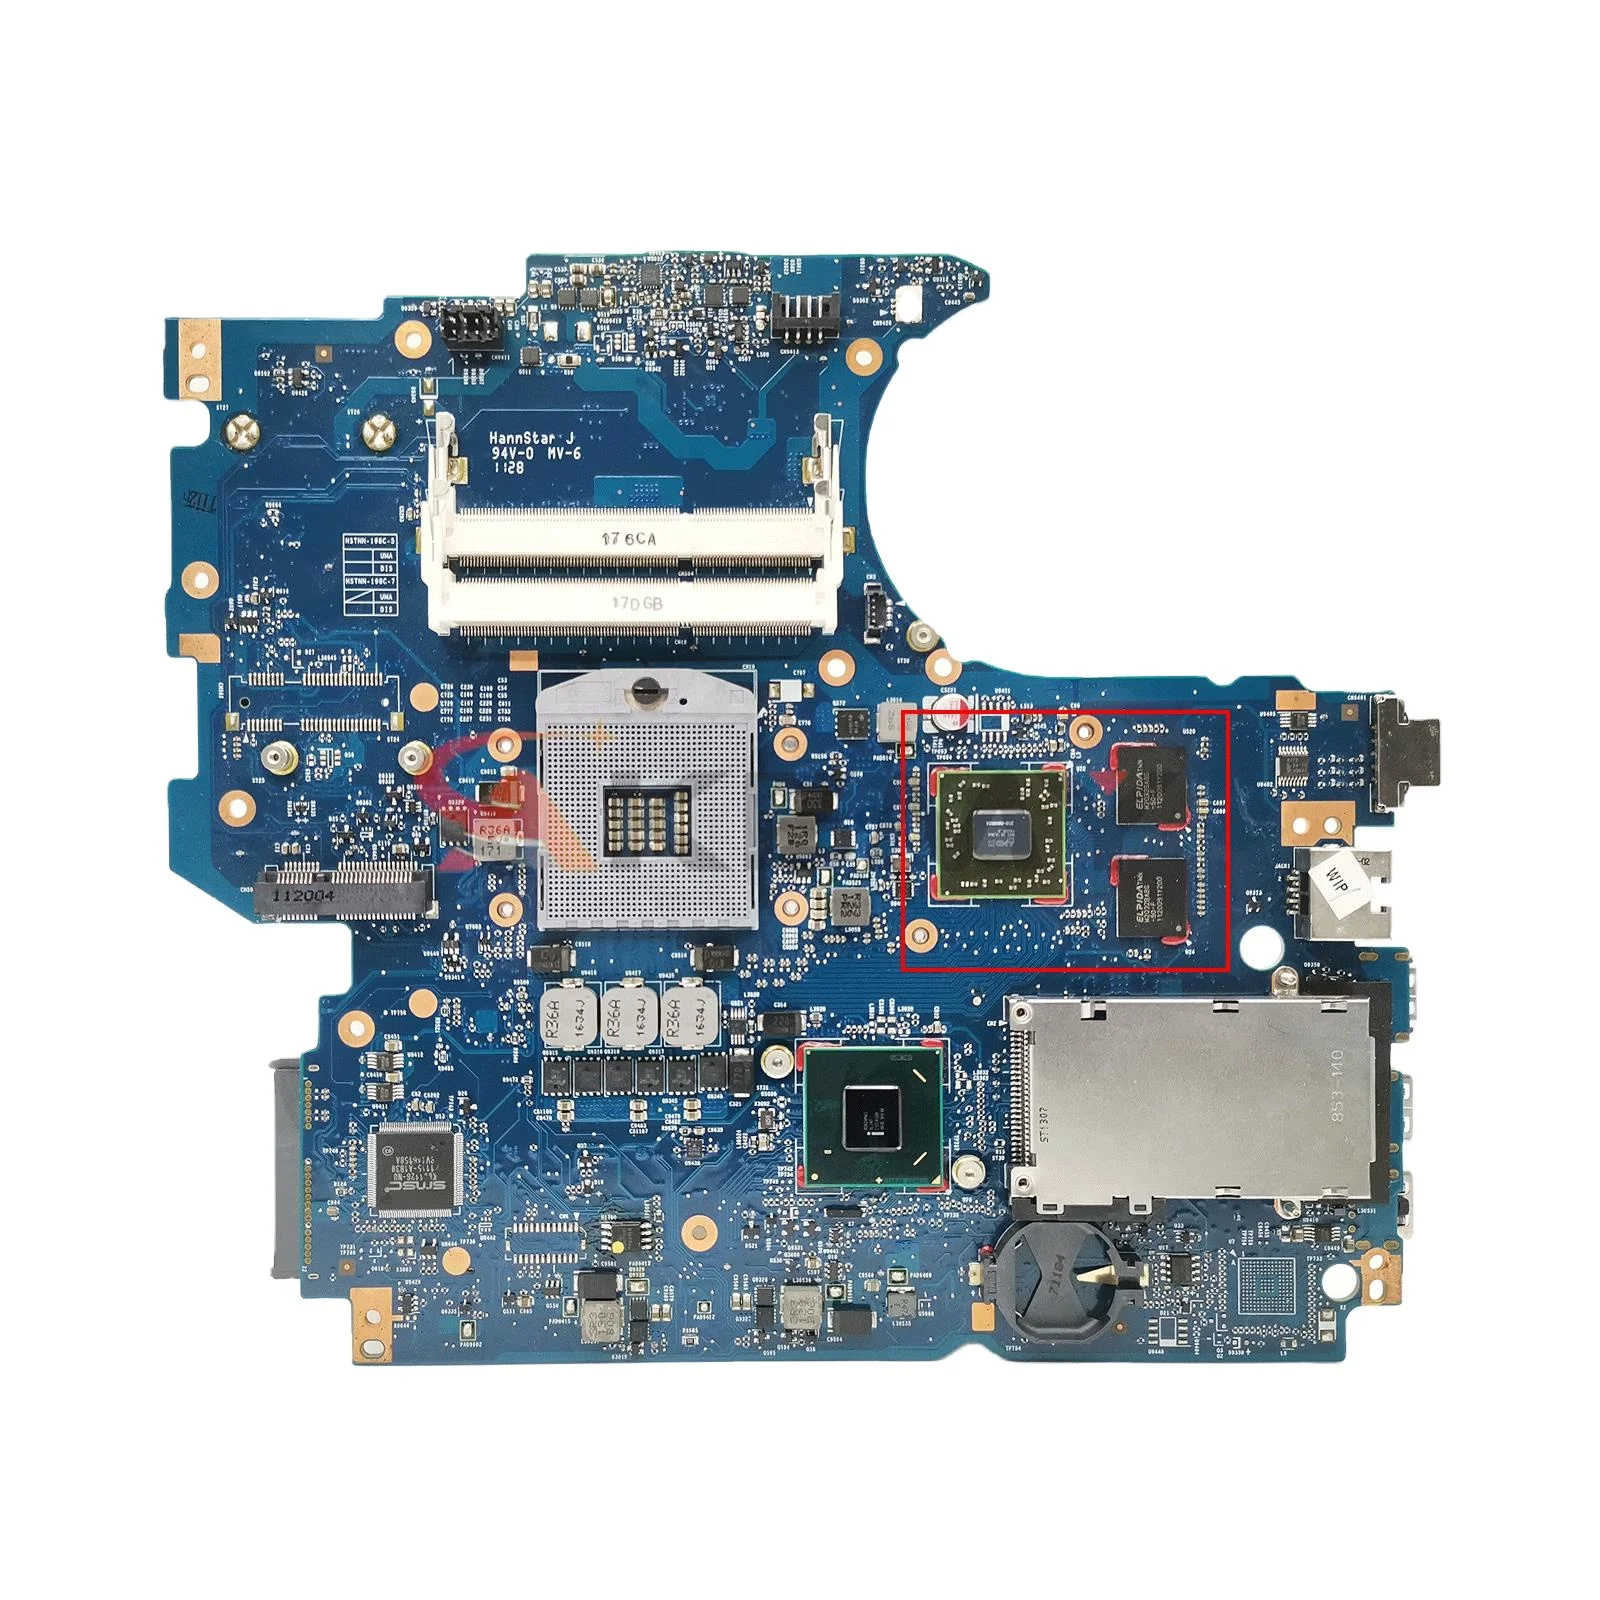 

670795-001 658343-001 670794-001 For HP ProBook 4530S 4730S Laptop Motherboard HM65 6050A2465501 With HD6470M 1G GPU